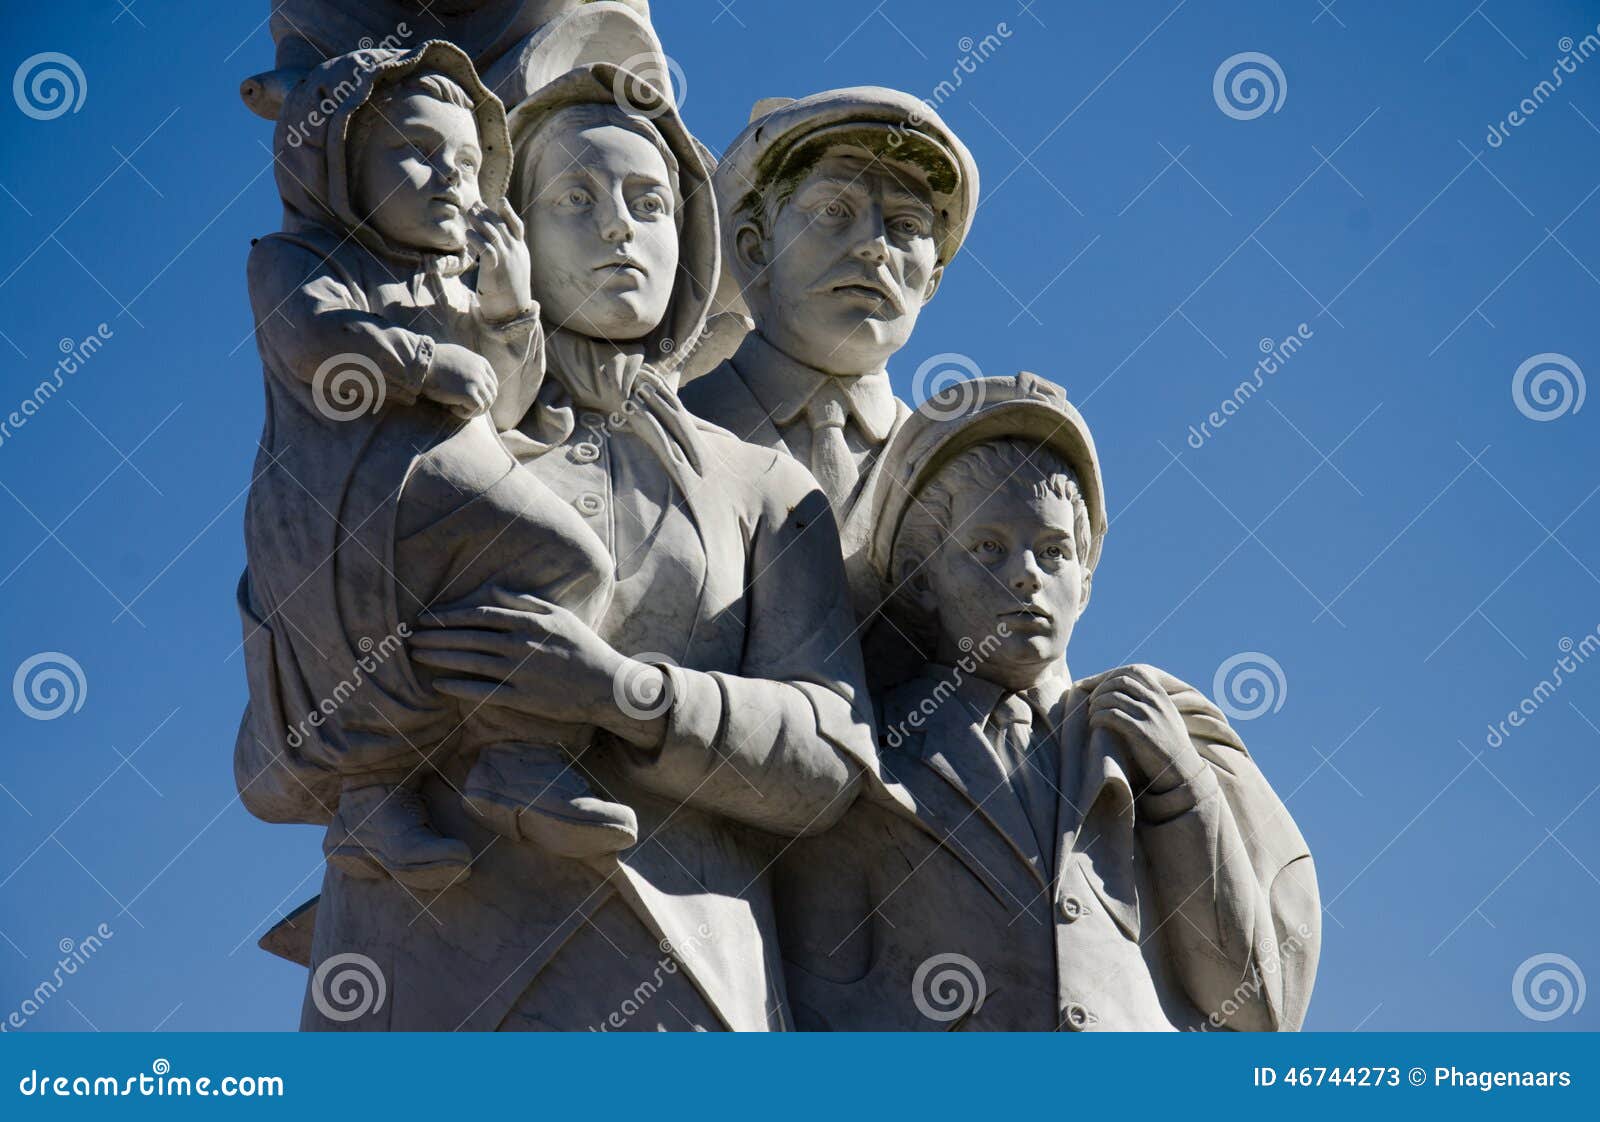 monument to the immigrants - new orleans